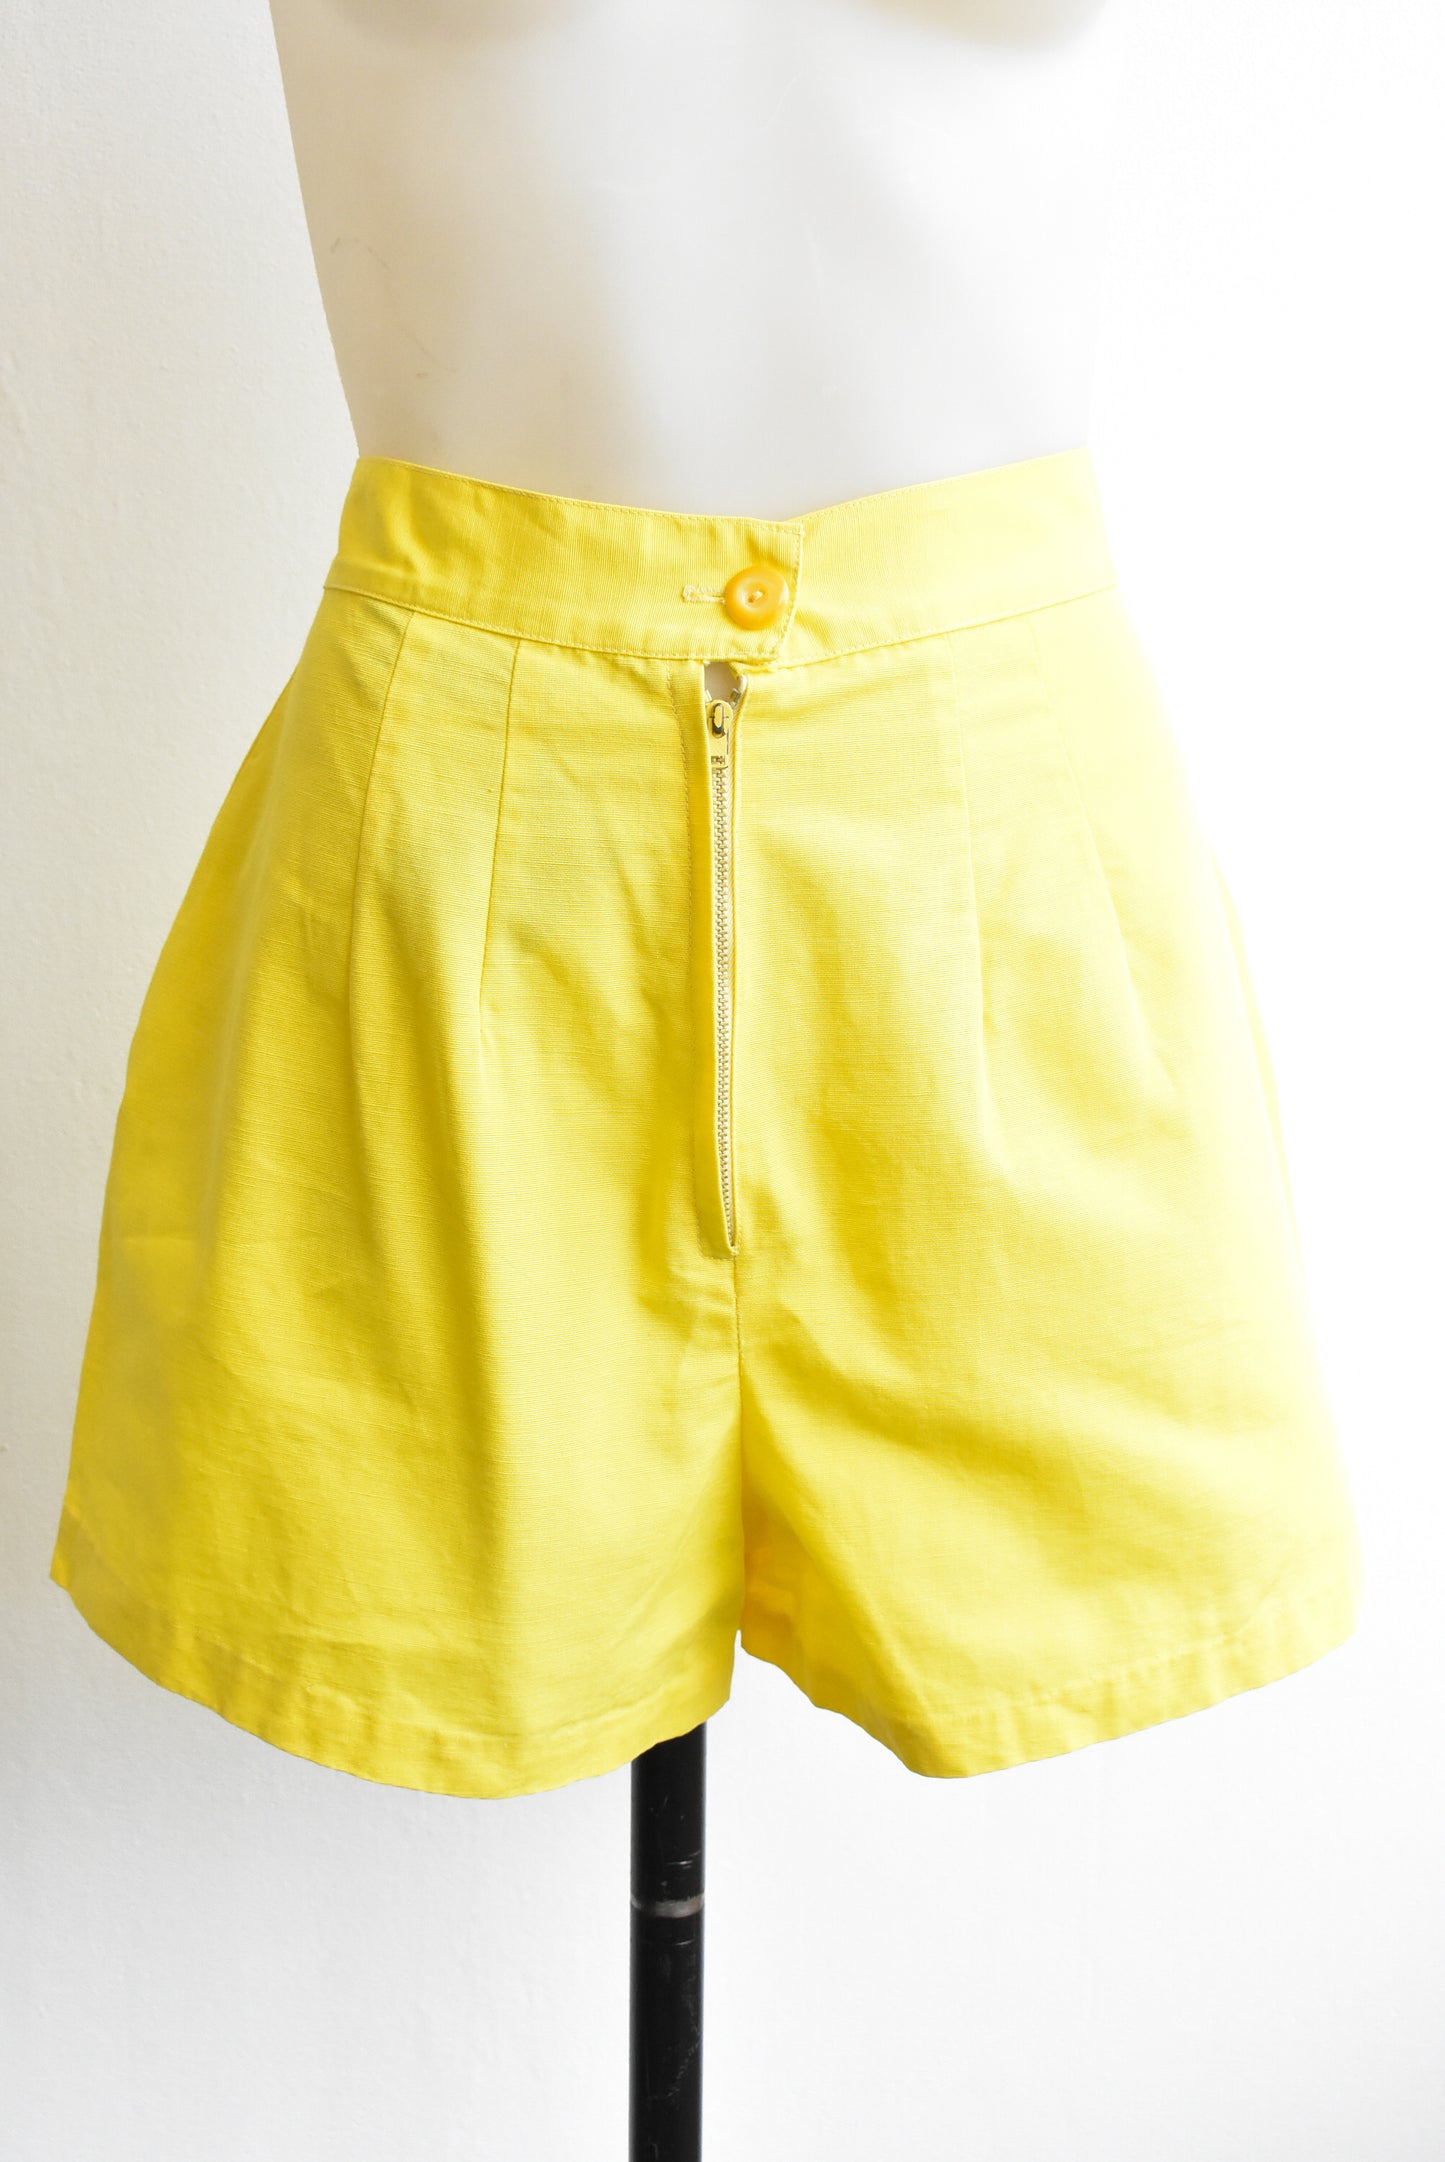 Crispin Cool vintage bright yellow high waisted shorts